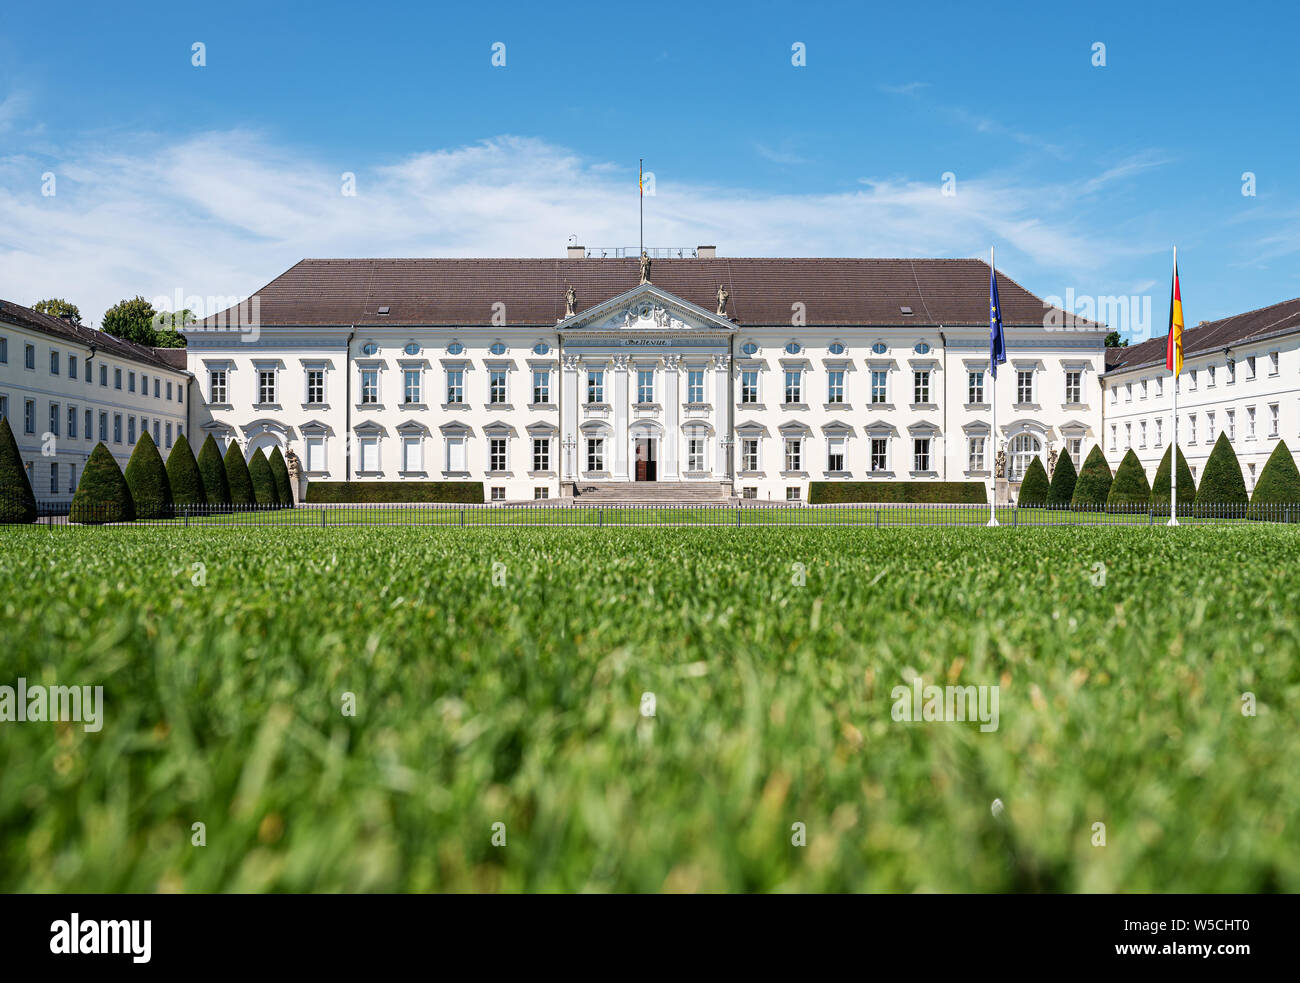 2019-07-24 Berlin, Germany: Bellevue Palace, Schloss Bellevue, in Tiergarten district, residence of the President of the Federal Republic of Germany Stock Photo